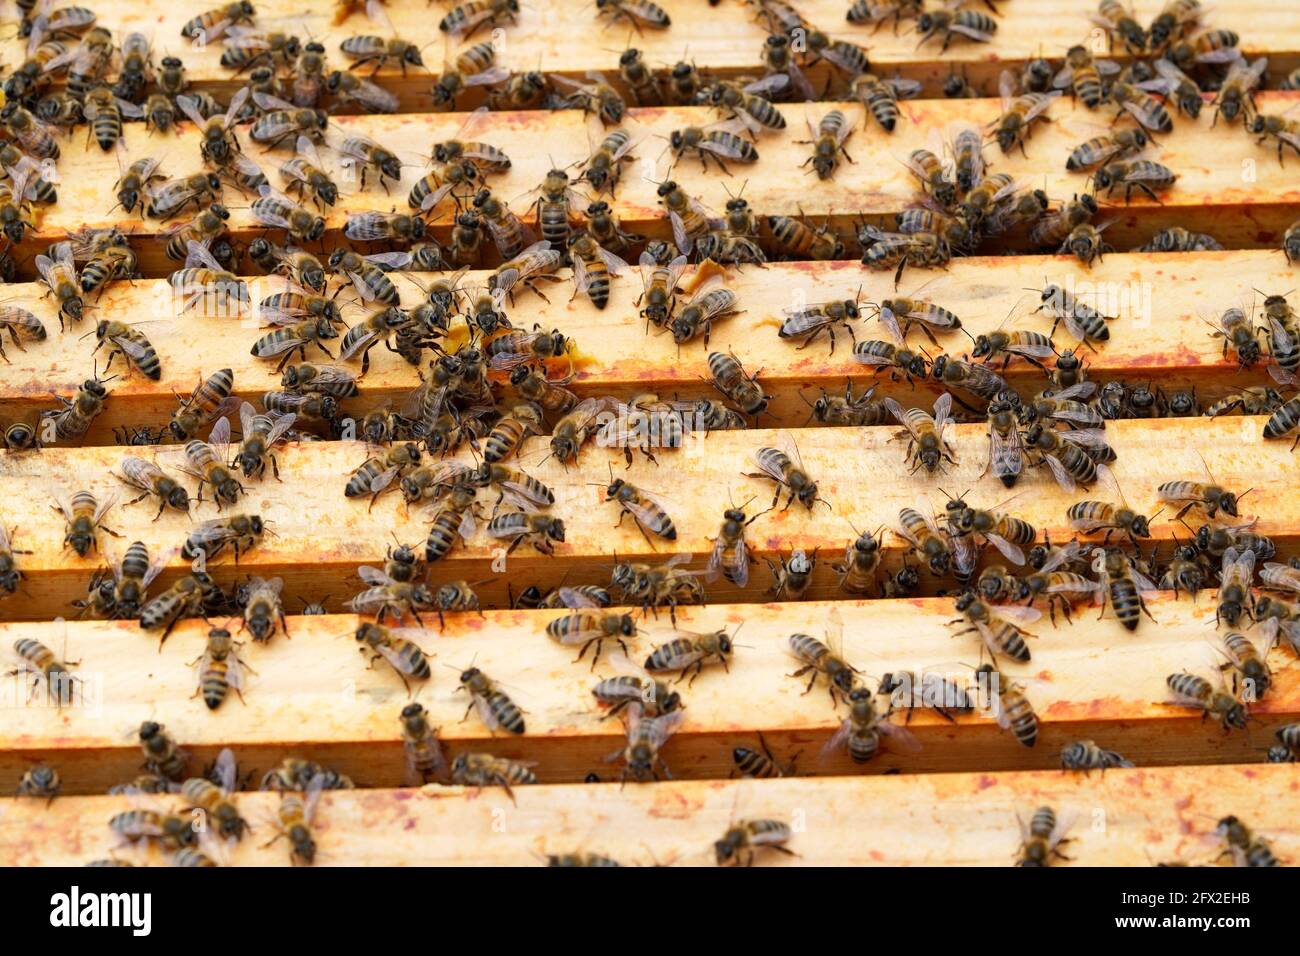 Glance into a beehive and the honey frames. Bees in a beehive. Apis mellifera. Close-up of insects. Bee colony. Stock Photo